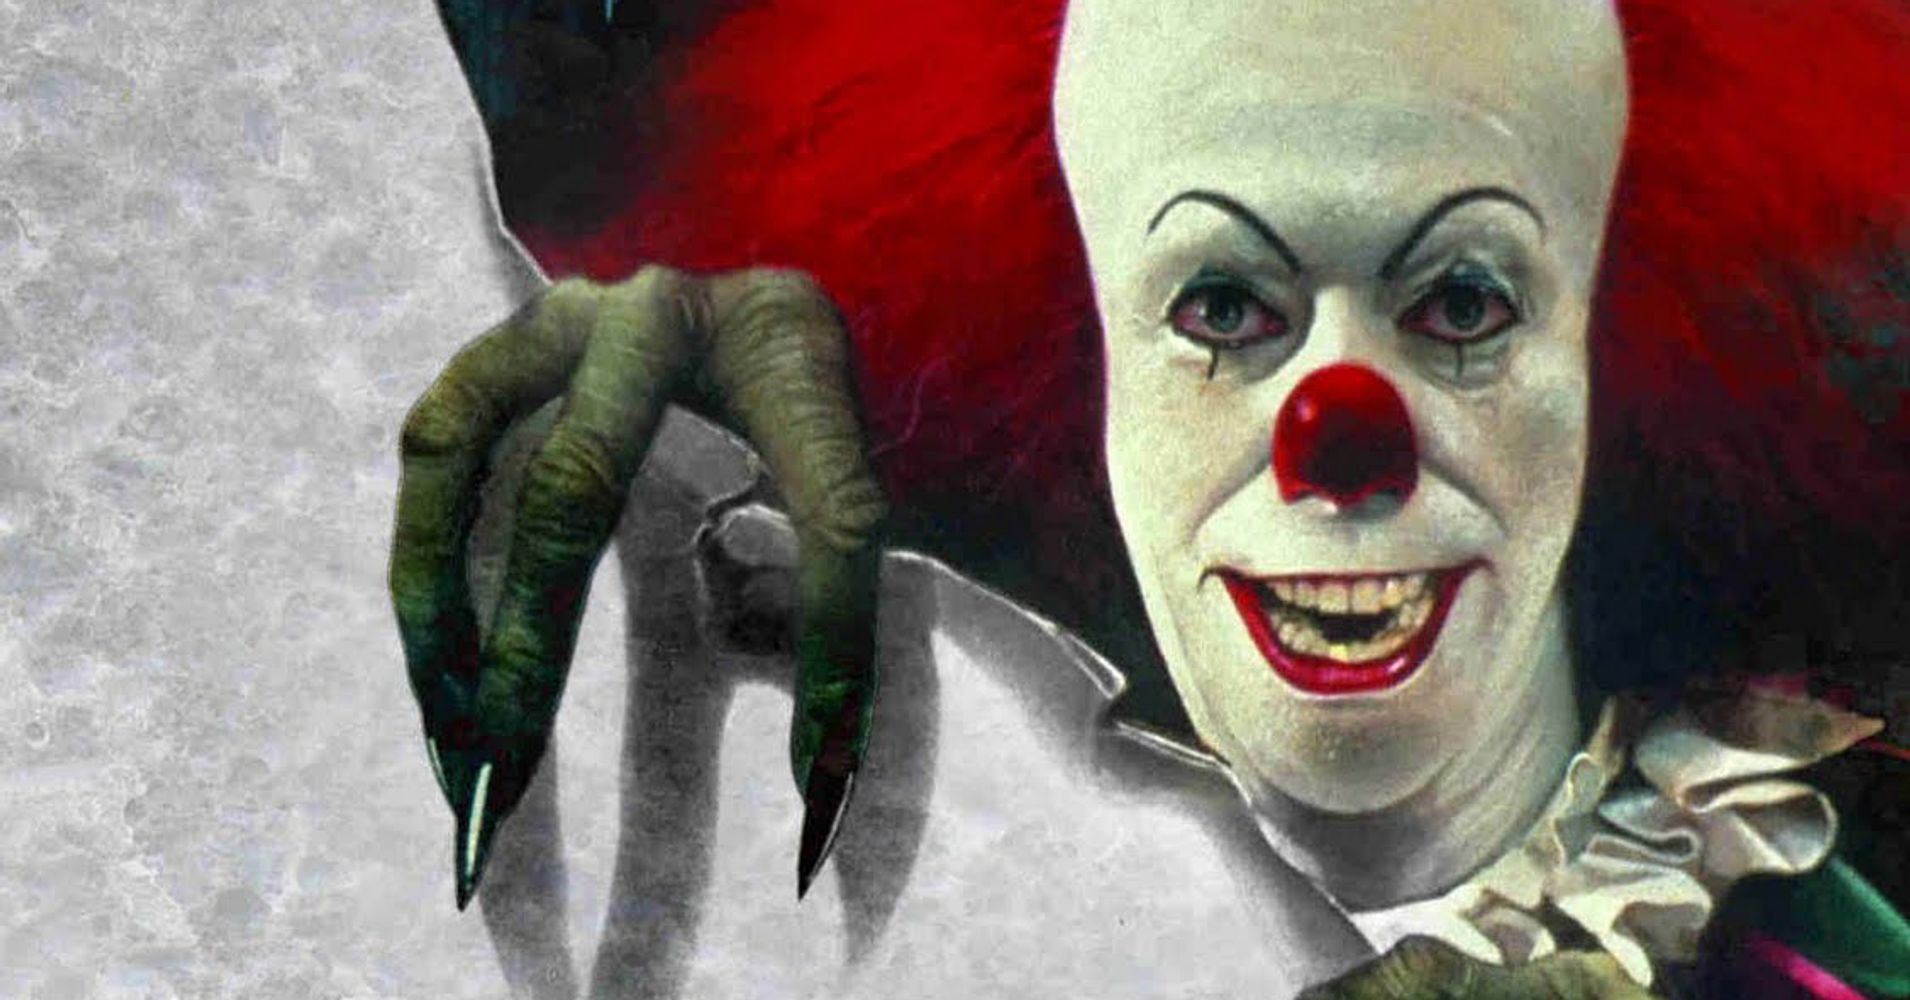 The First Look At Pennywise The Clown From The New 'It' Film Is ...